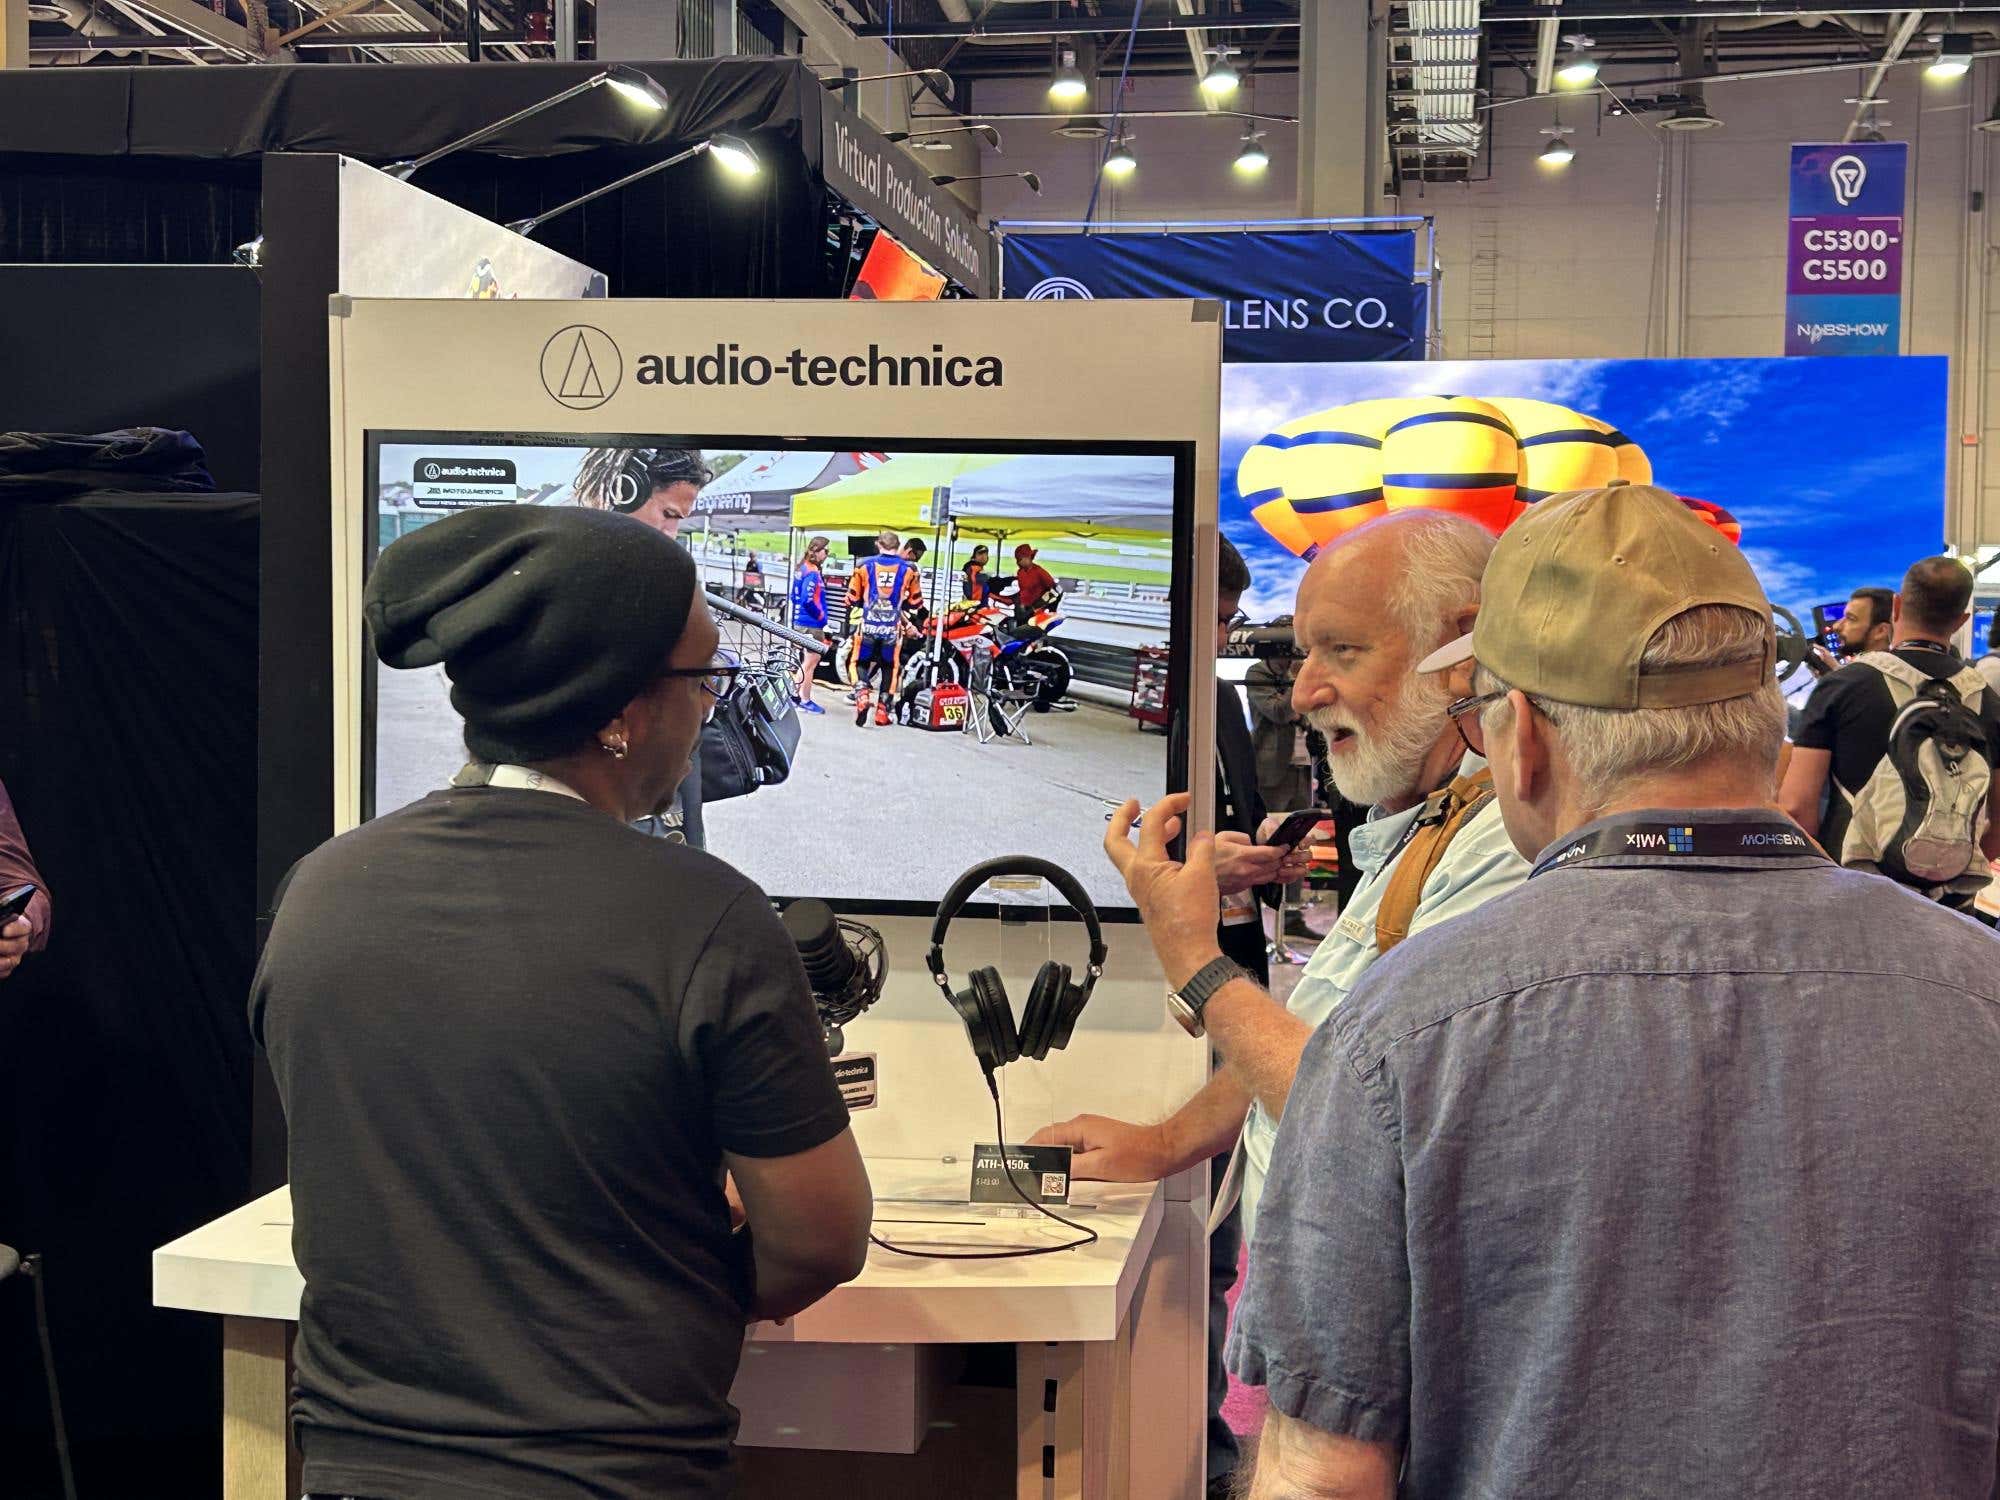 stations introduced visitors to our ATH-M50x and ATH-M40x headphones